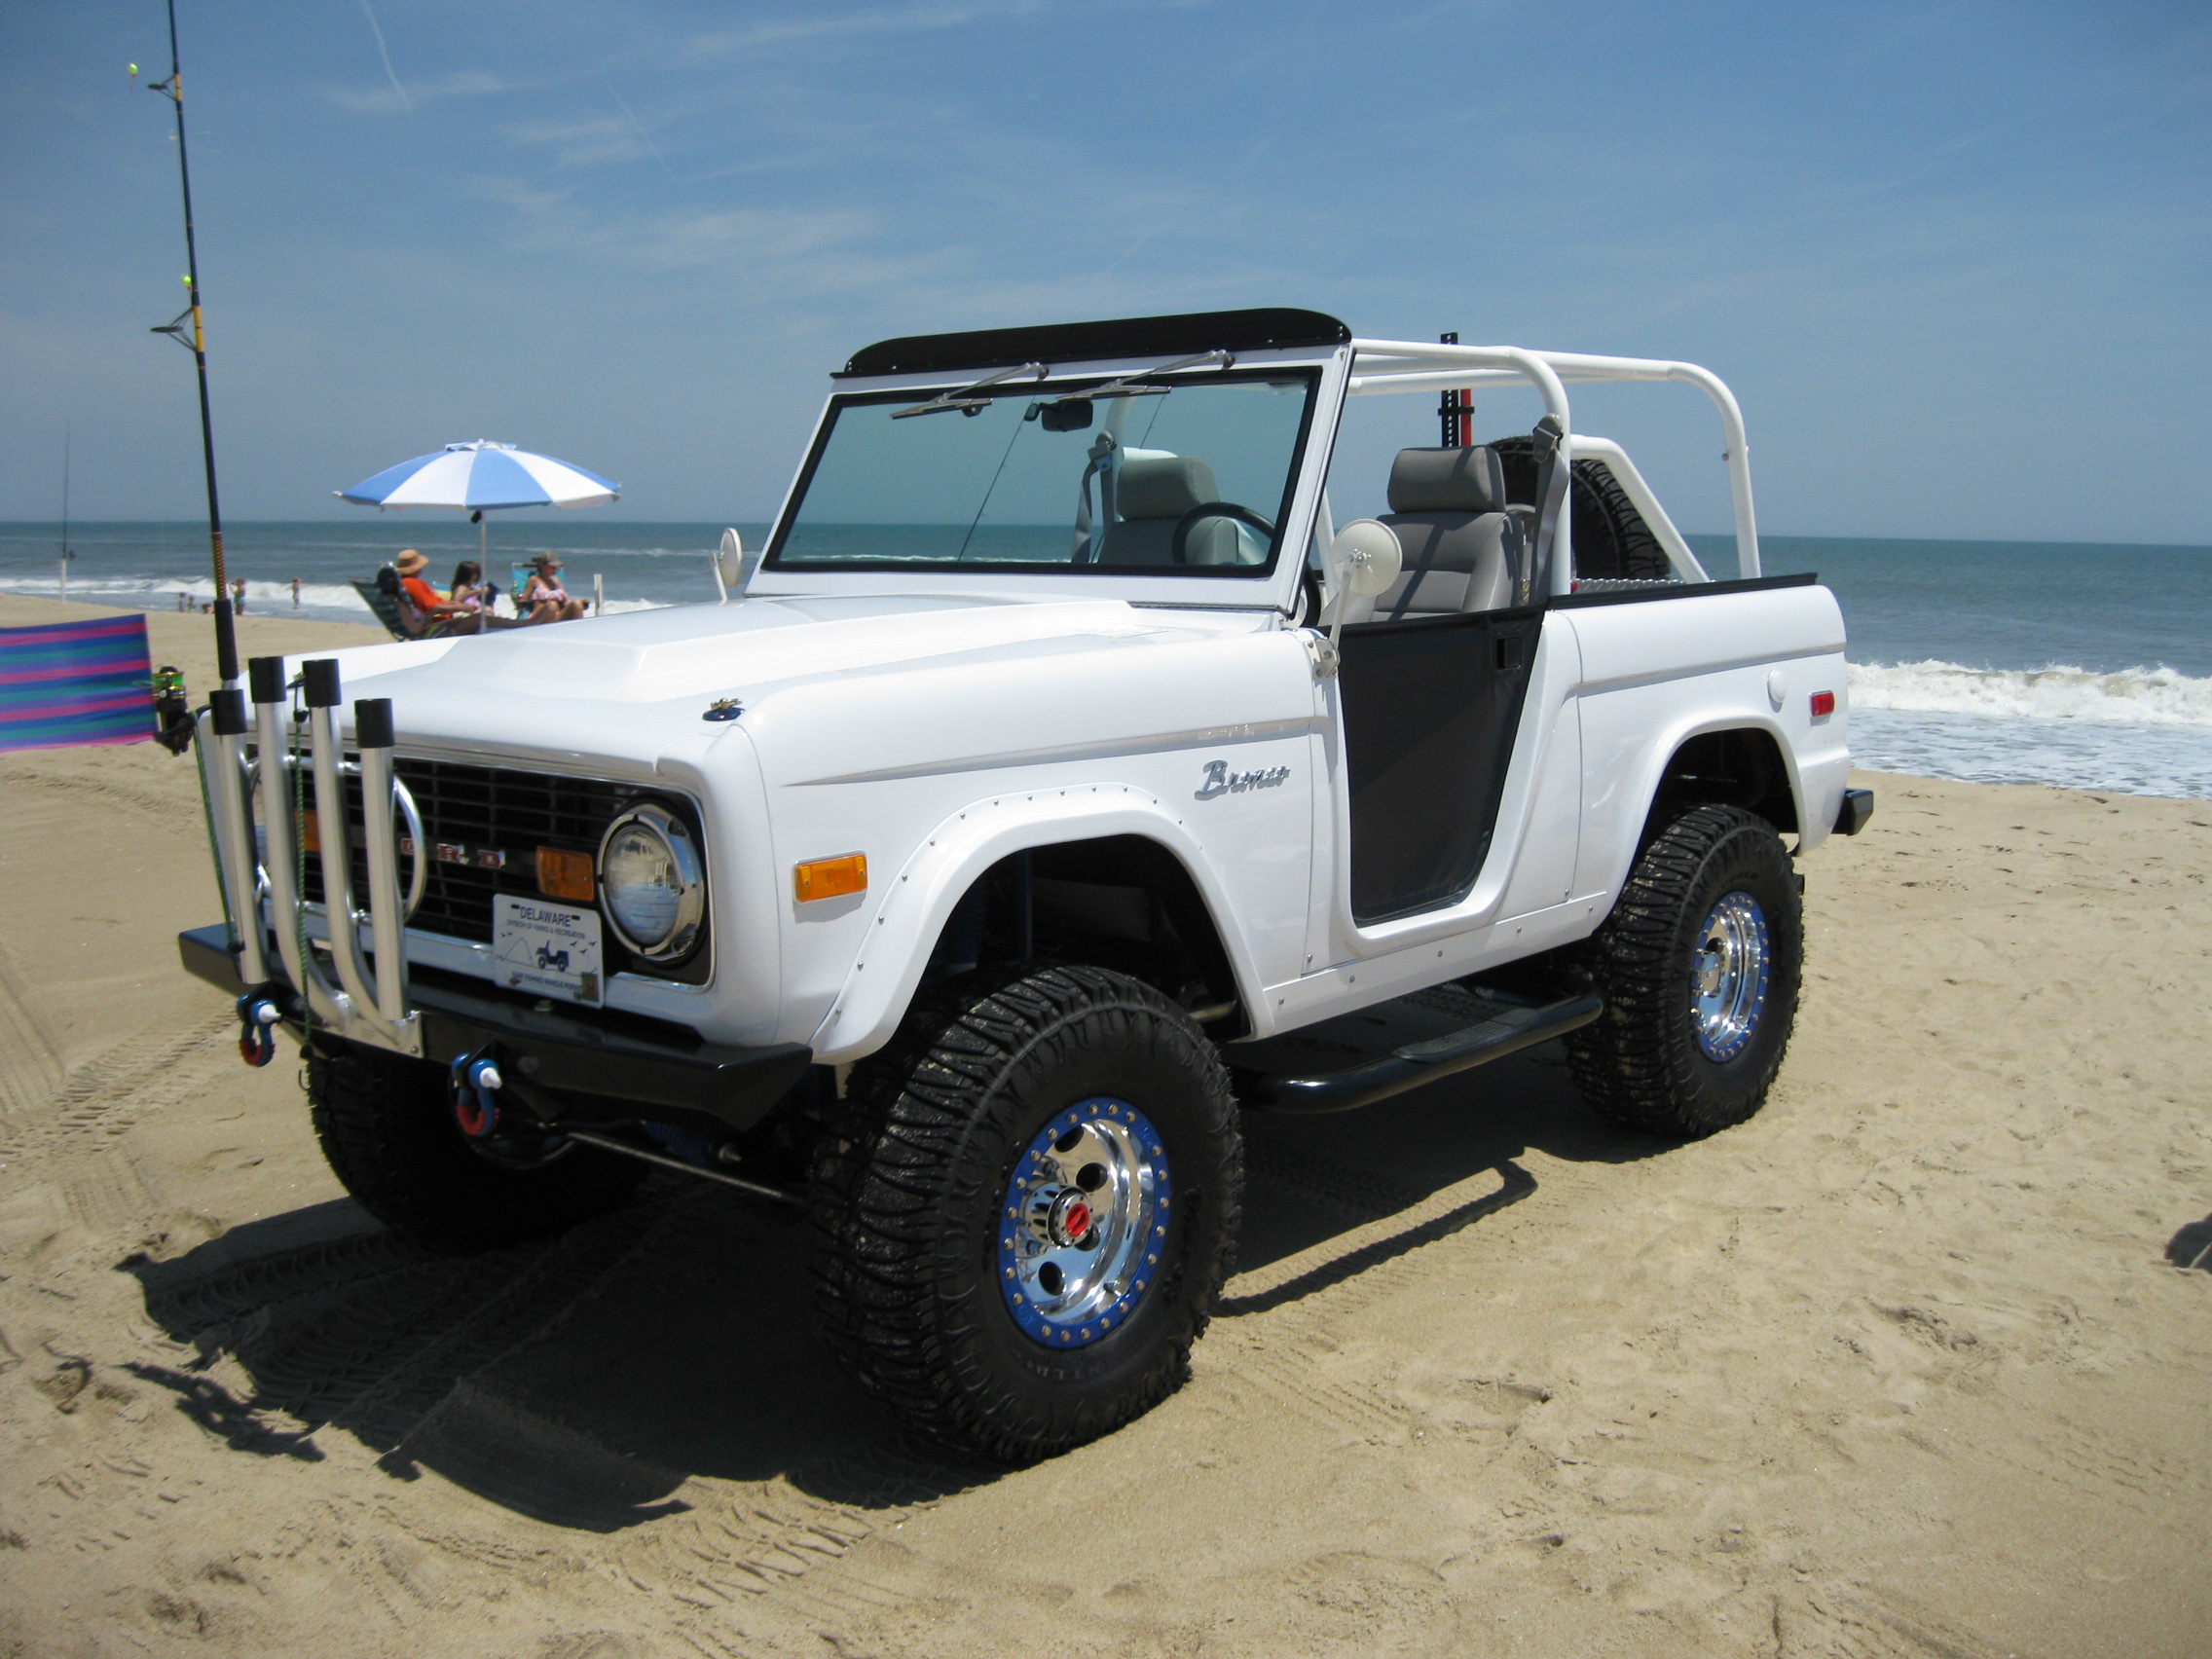 Ford Bronco Broncos and fishing- lets see em 2014-05-27 00.49.25